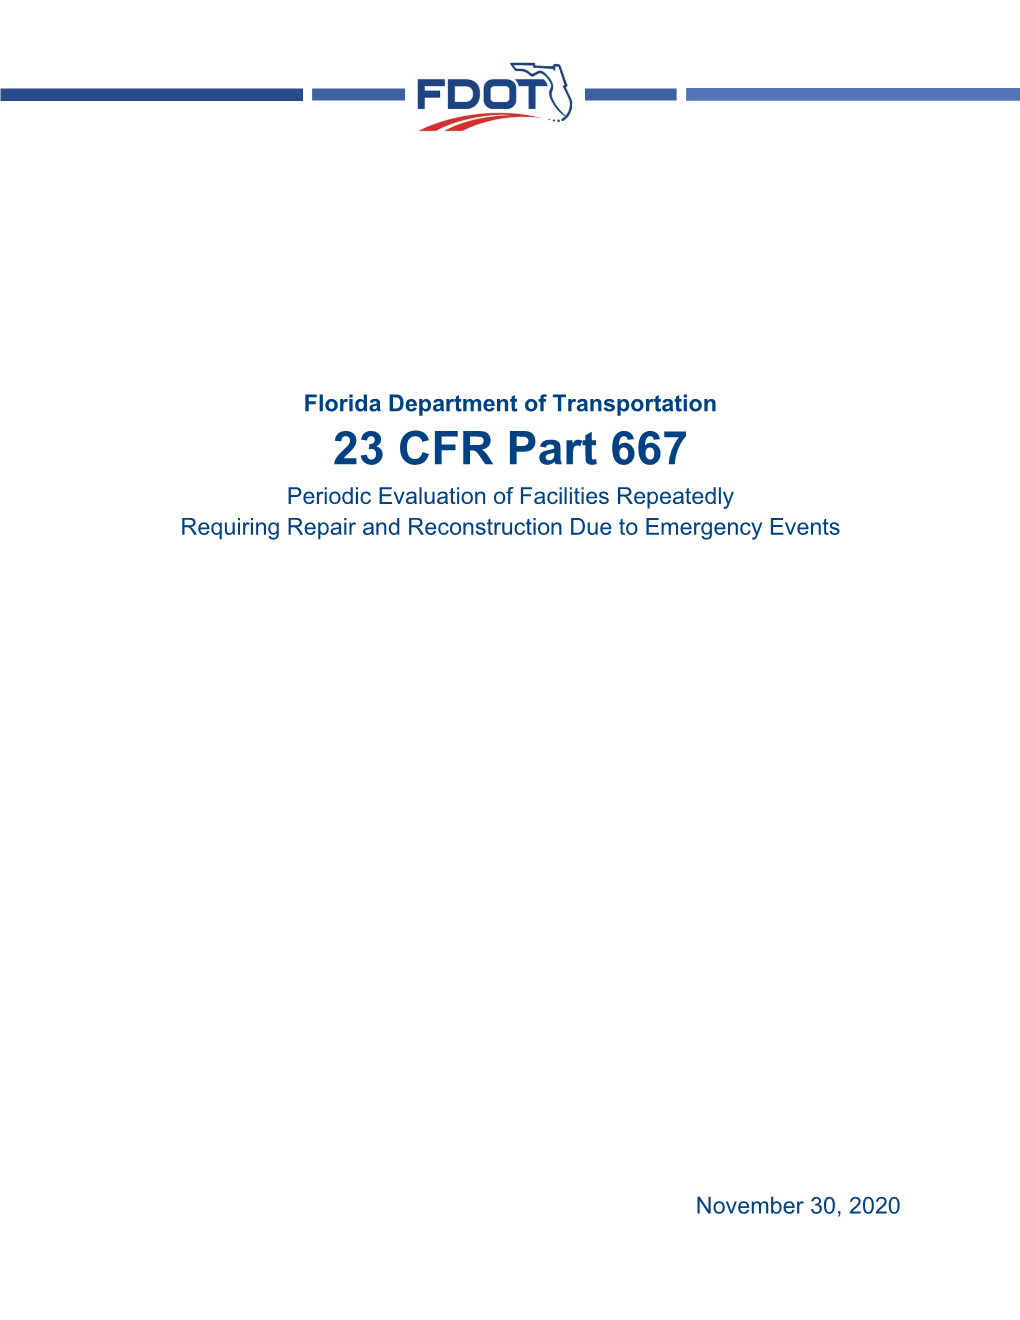 23 CFR Part 667 Periodic Evaluation of Facilities Repeatedly Requiring Repair and Reconstruction Due to Emergency Events